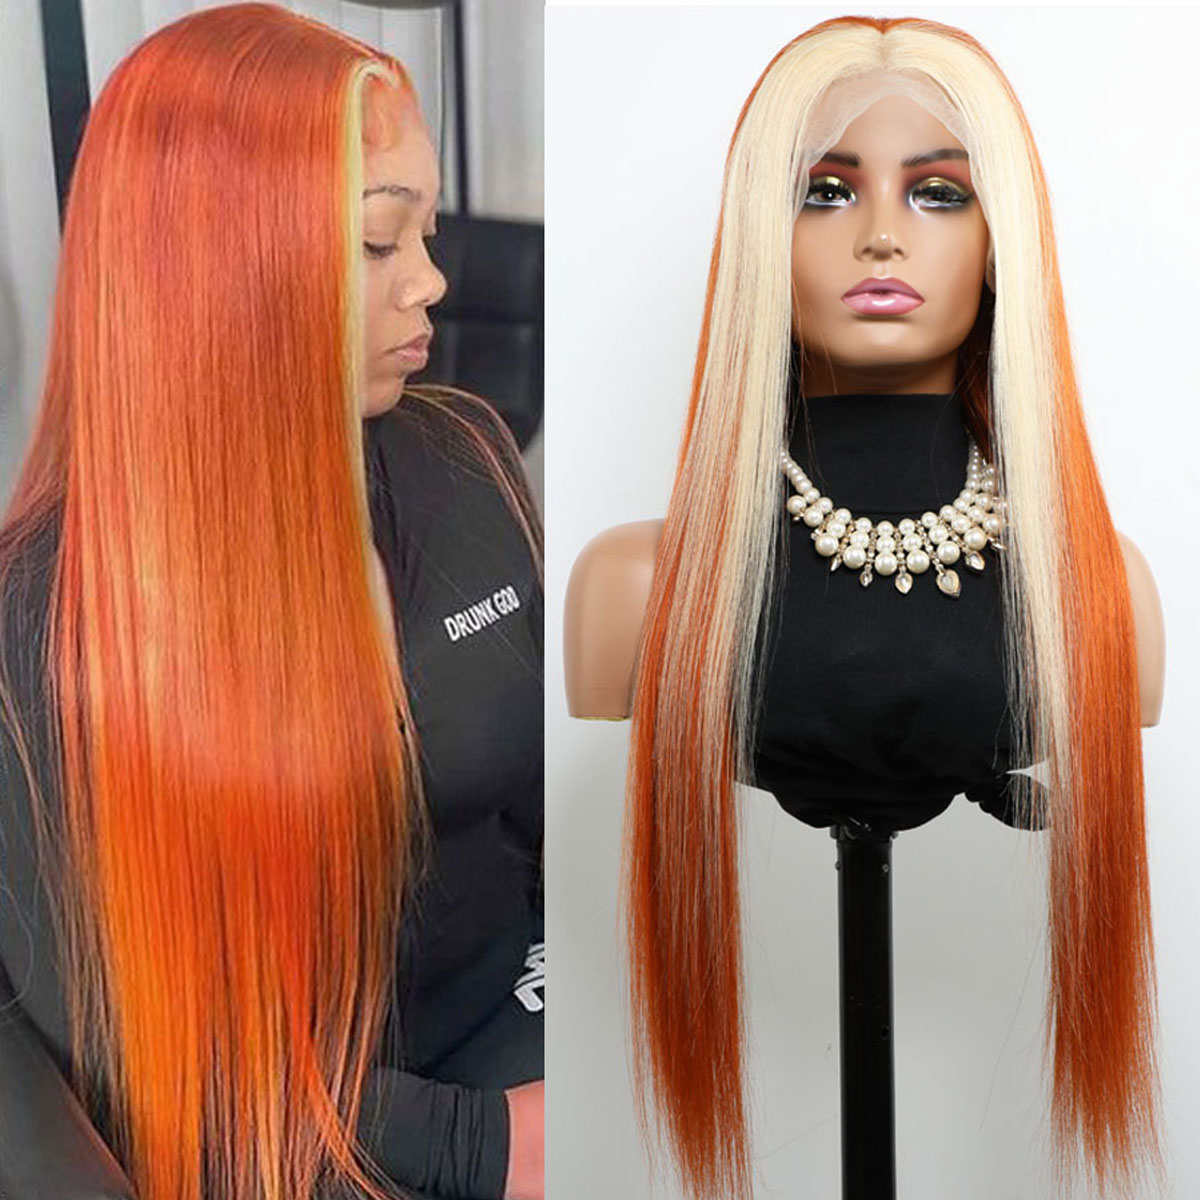 Ginger Blonde Straight Human Hair Wig 13x4 Transparent Lace Front Virgin Hair